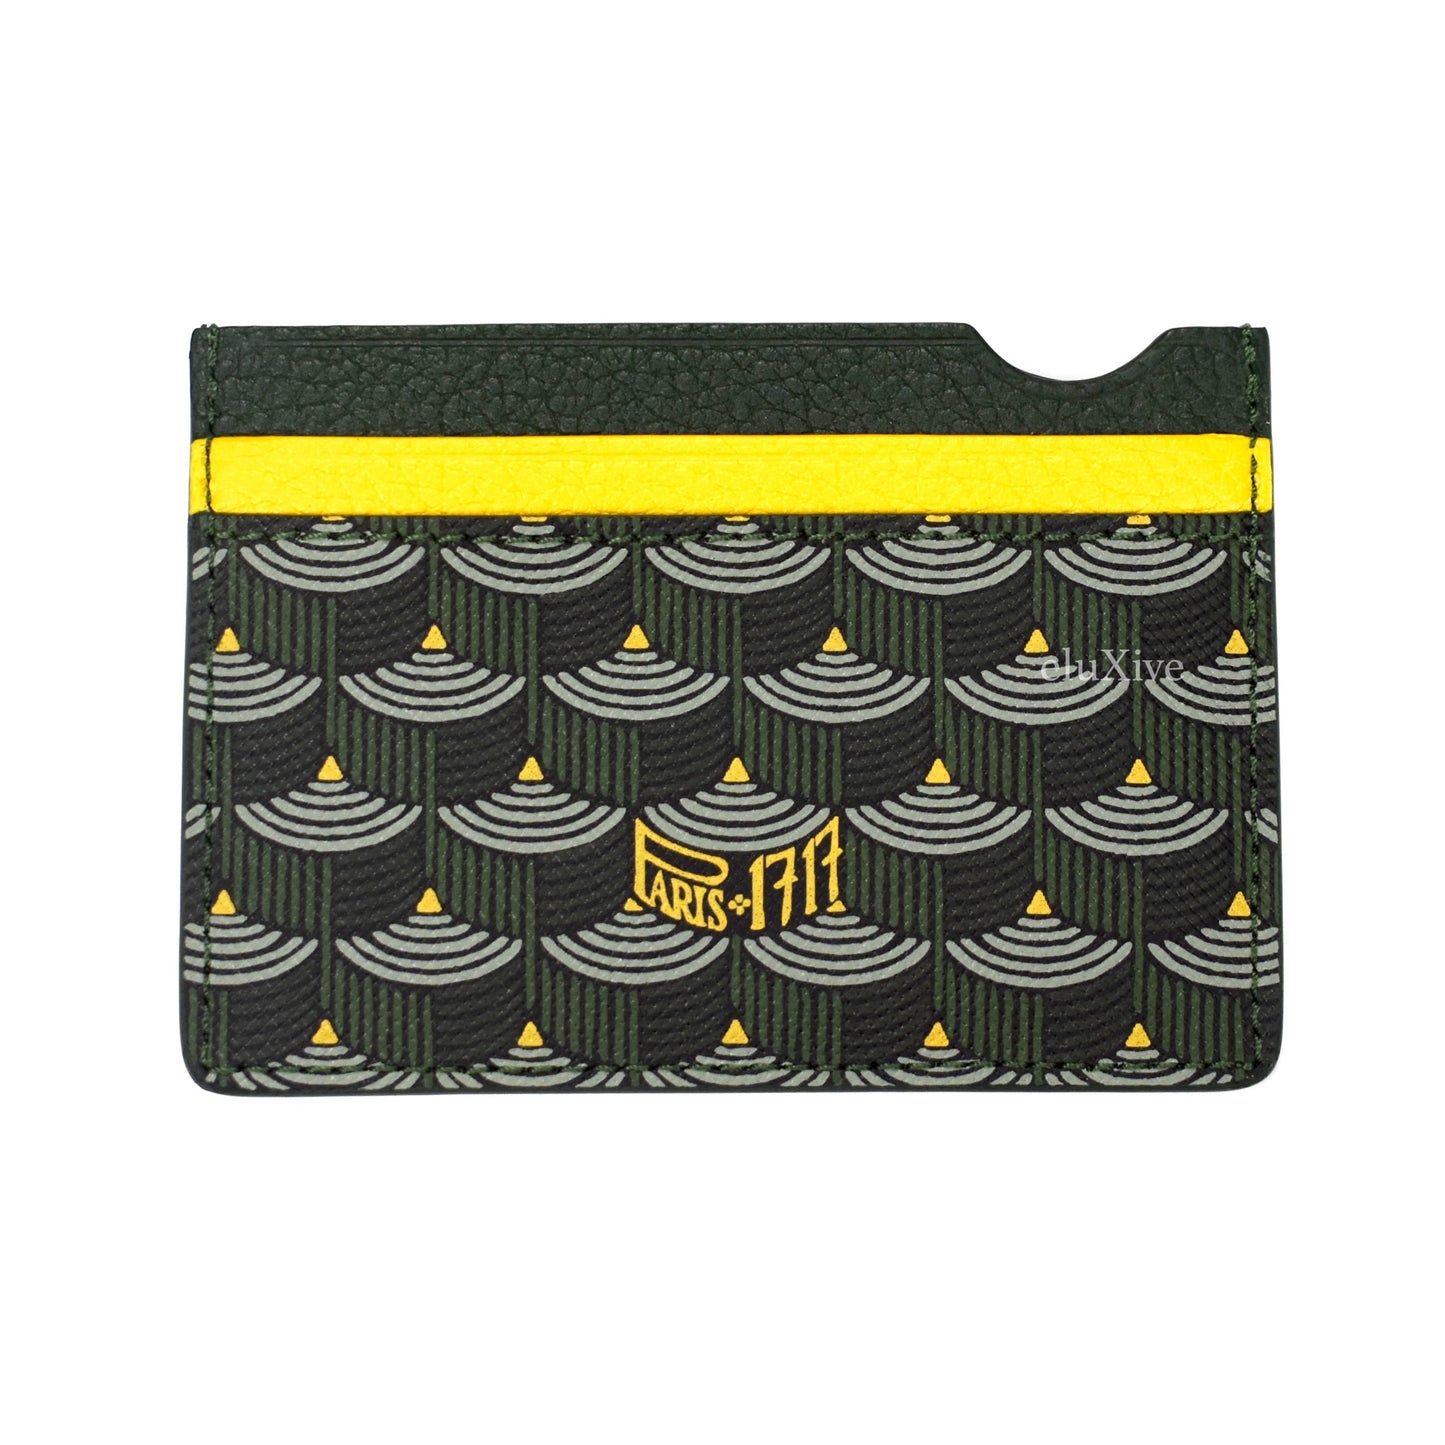 Faure Le Page - Empire Green / Yellow 4CC Card Holder (2020)